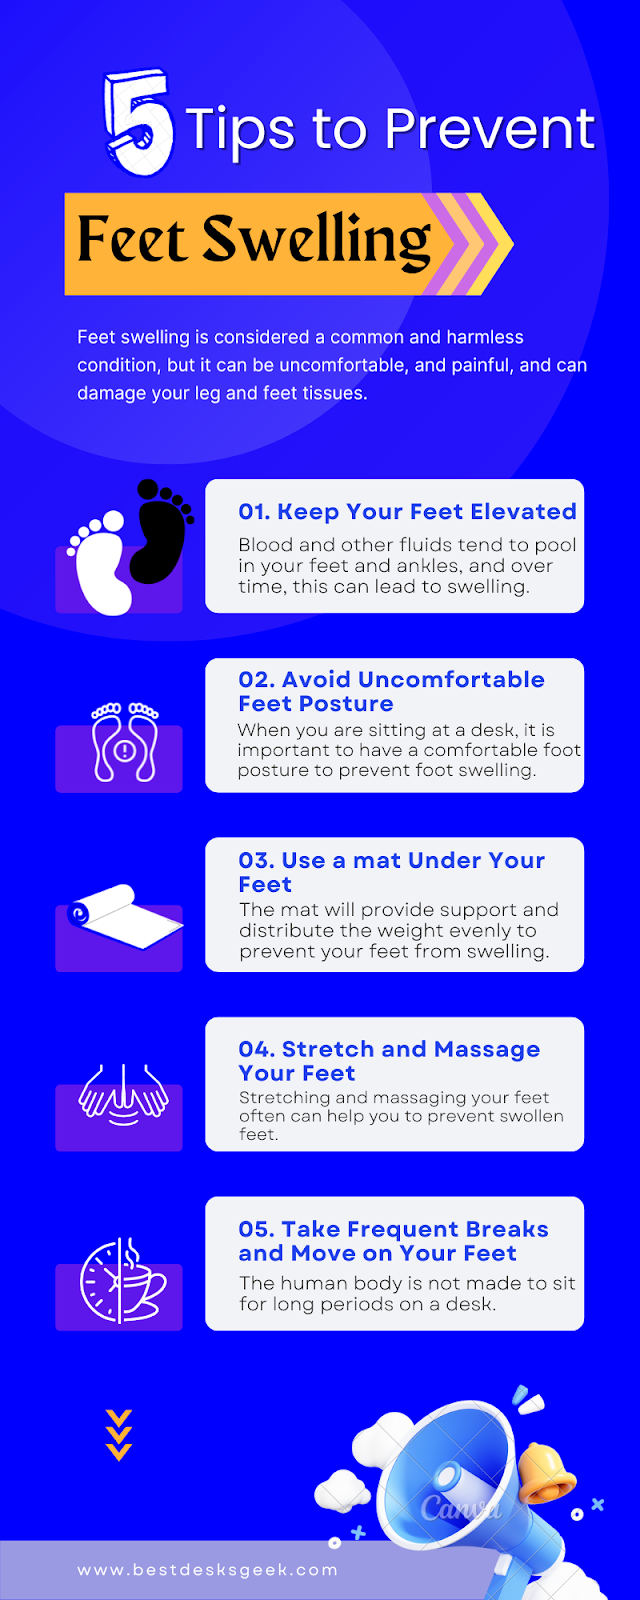 An infographic showing Tips to Prevent Feet Swelling